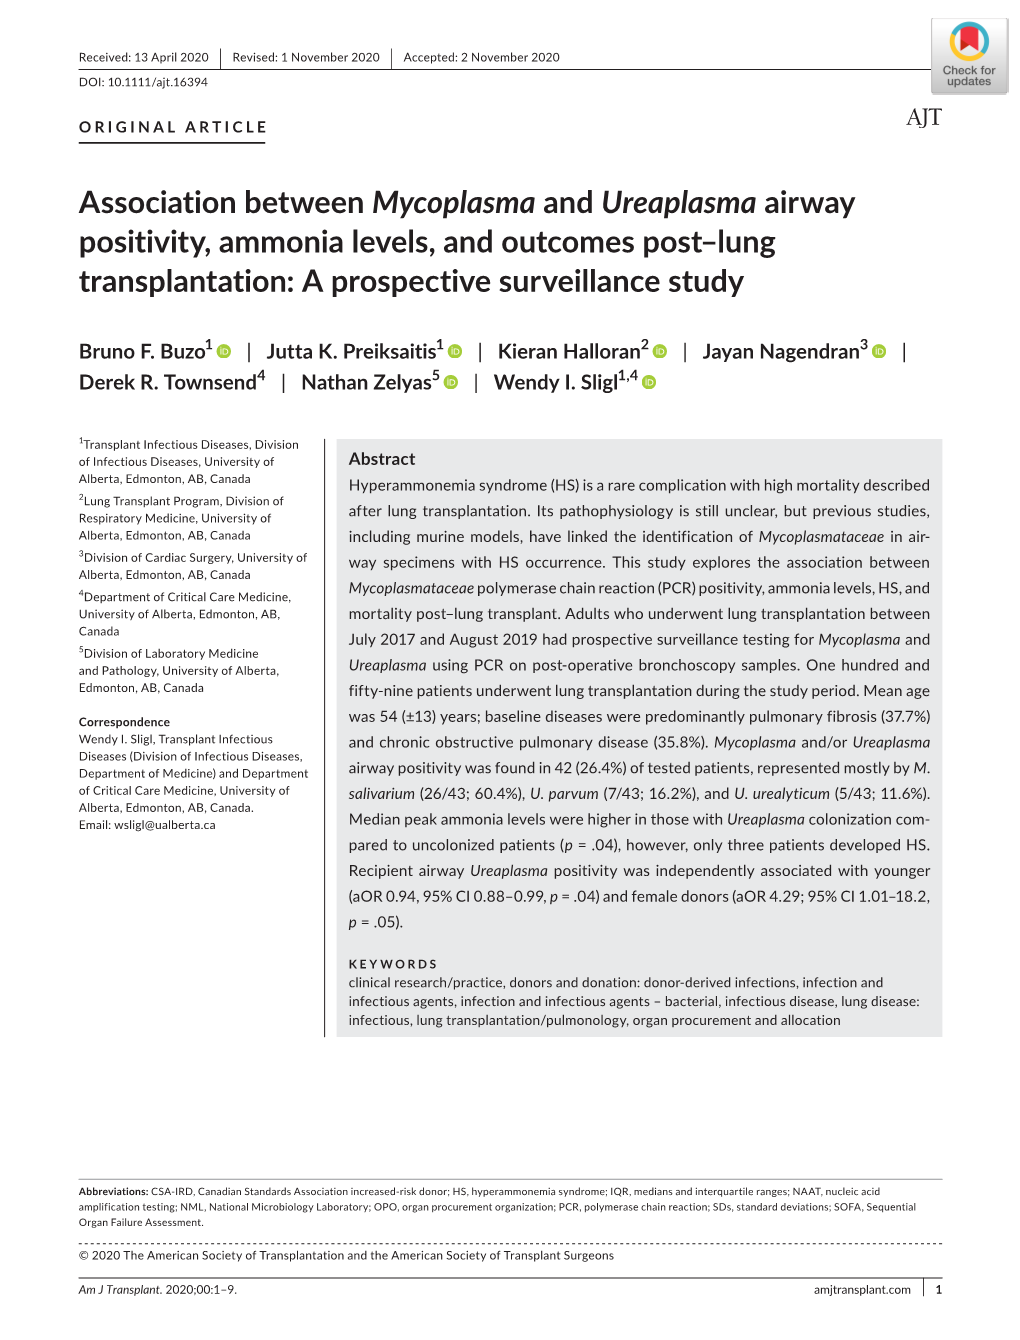 Association Between Mycoplasma and Ureaplasma Airway Positivity, Ammonia Levels, and Outcomes Post–Lung Transplantation: a Prospective Surveillance Study